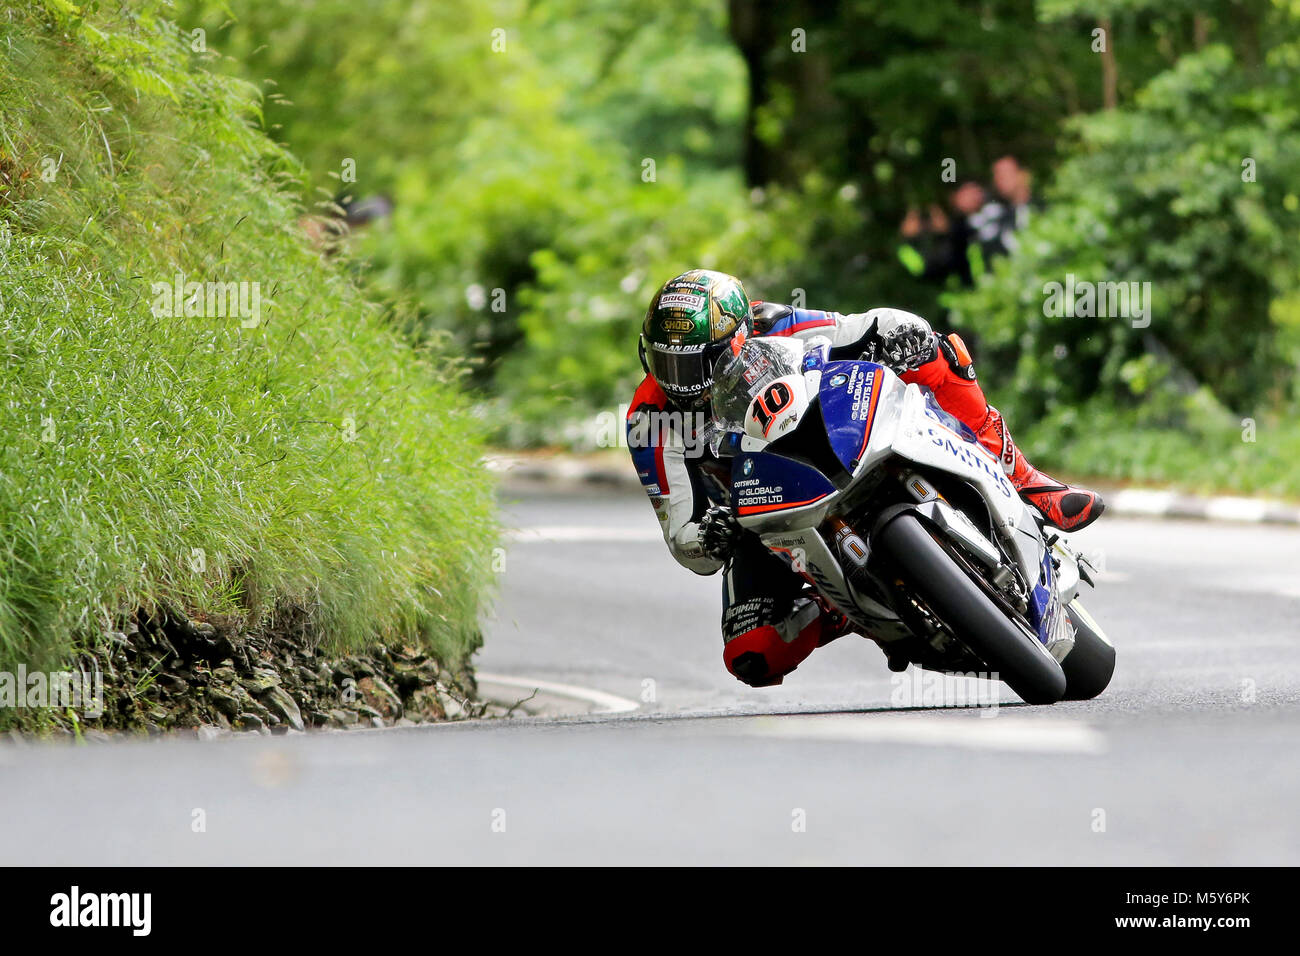 Peter Hickman 'Hicky' on the Smith's Racing BMW Superbike during the Senior TT in the Isle of Man Stock Photo